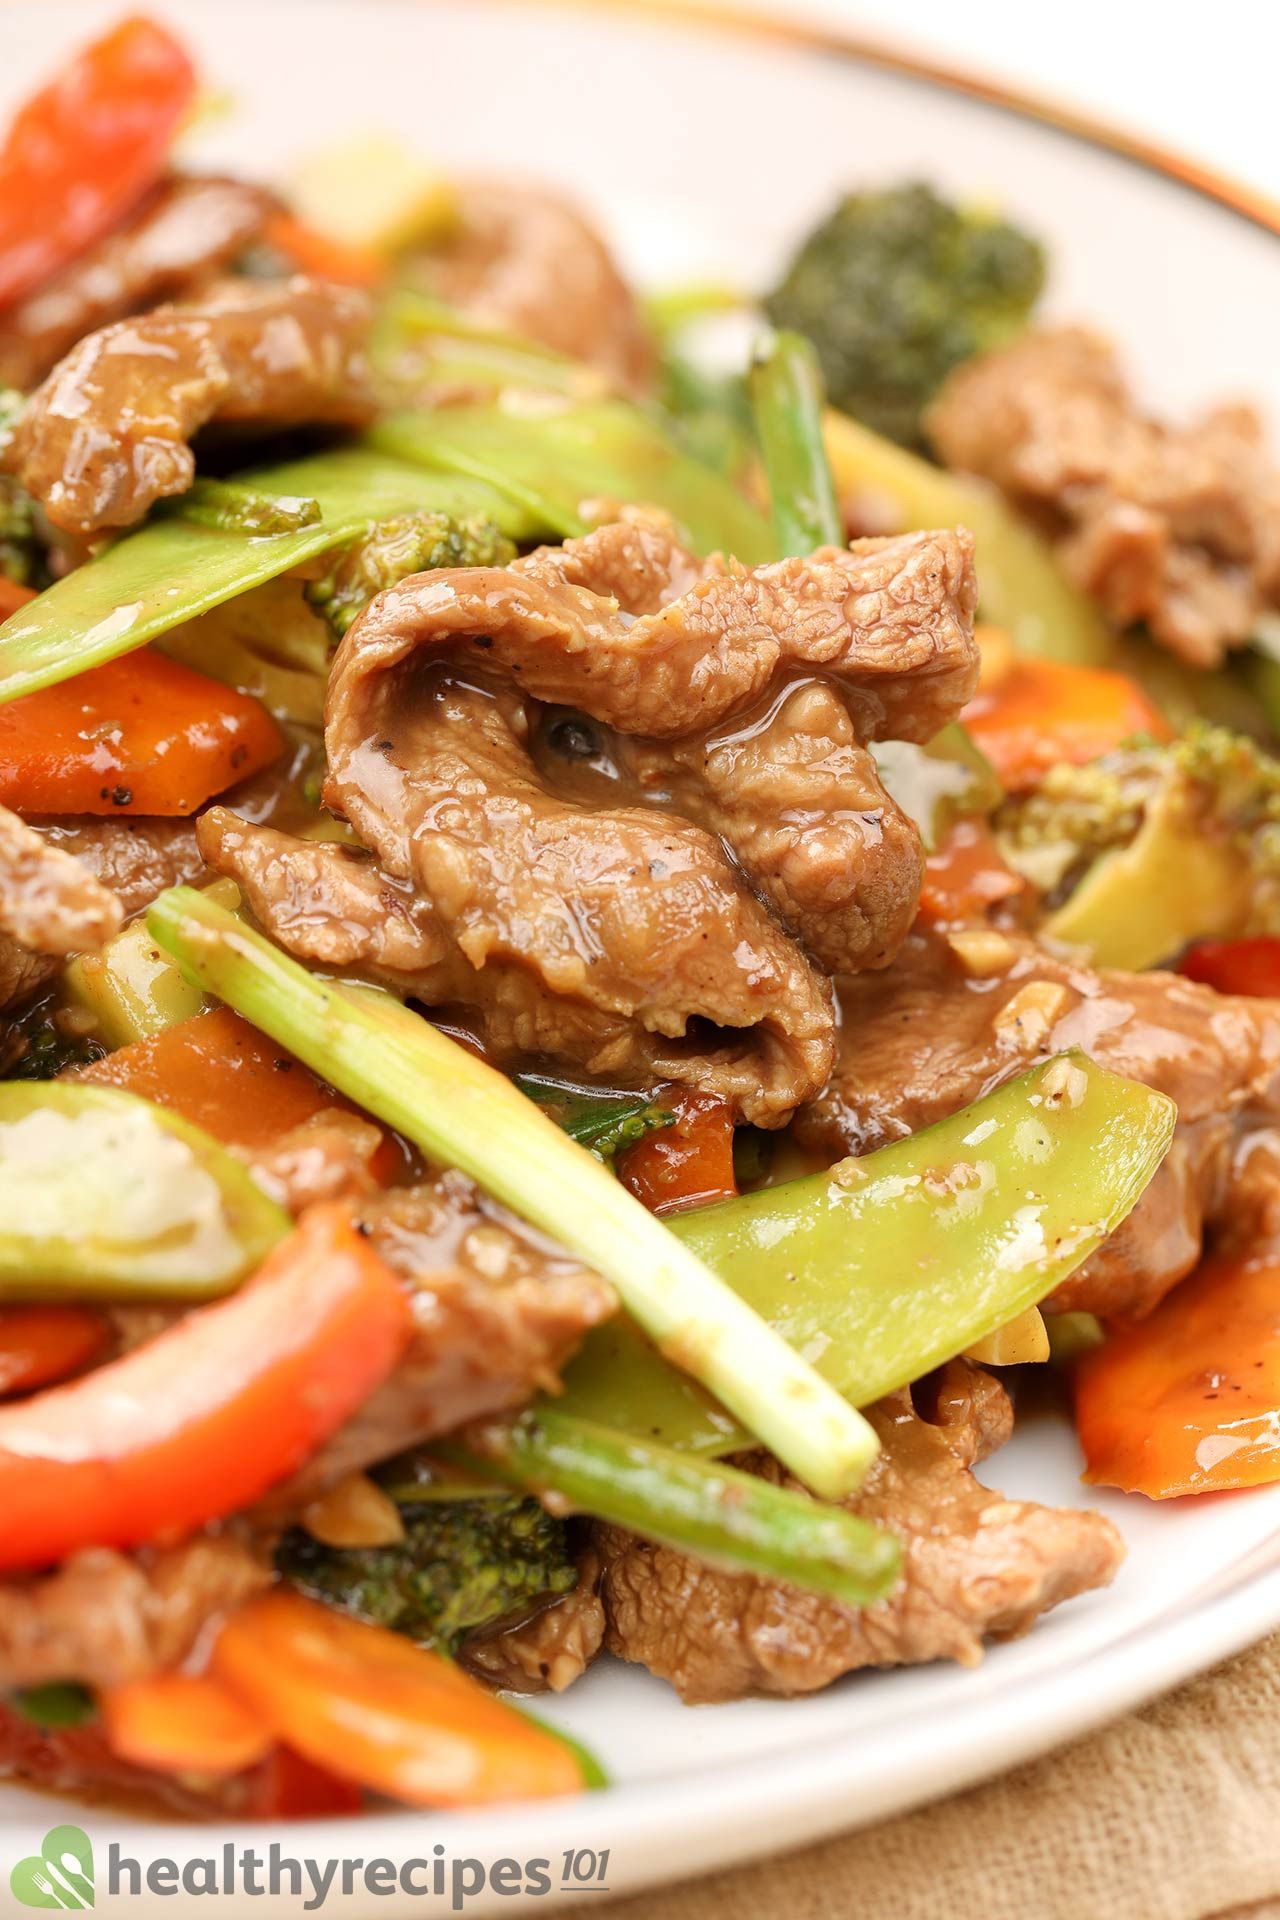 Tips for Making Perfect Beef Stir-Fry